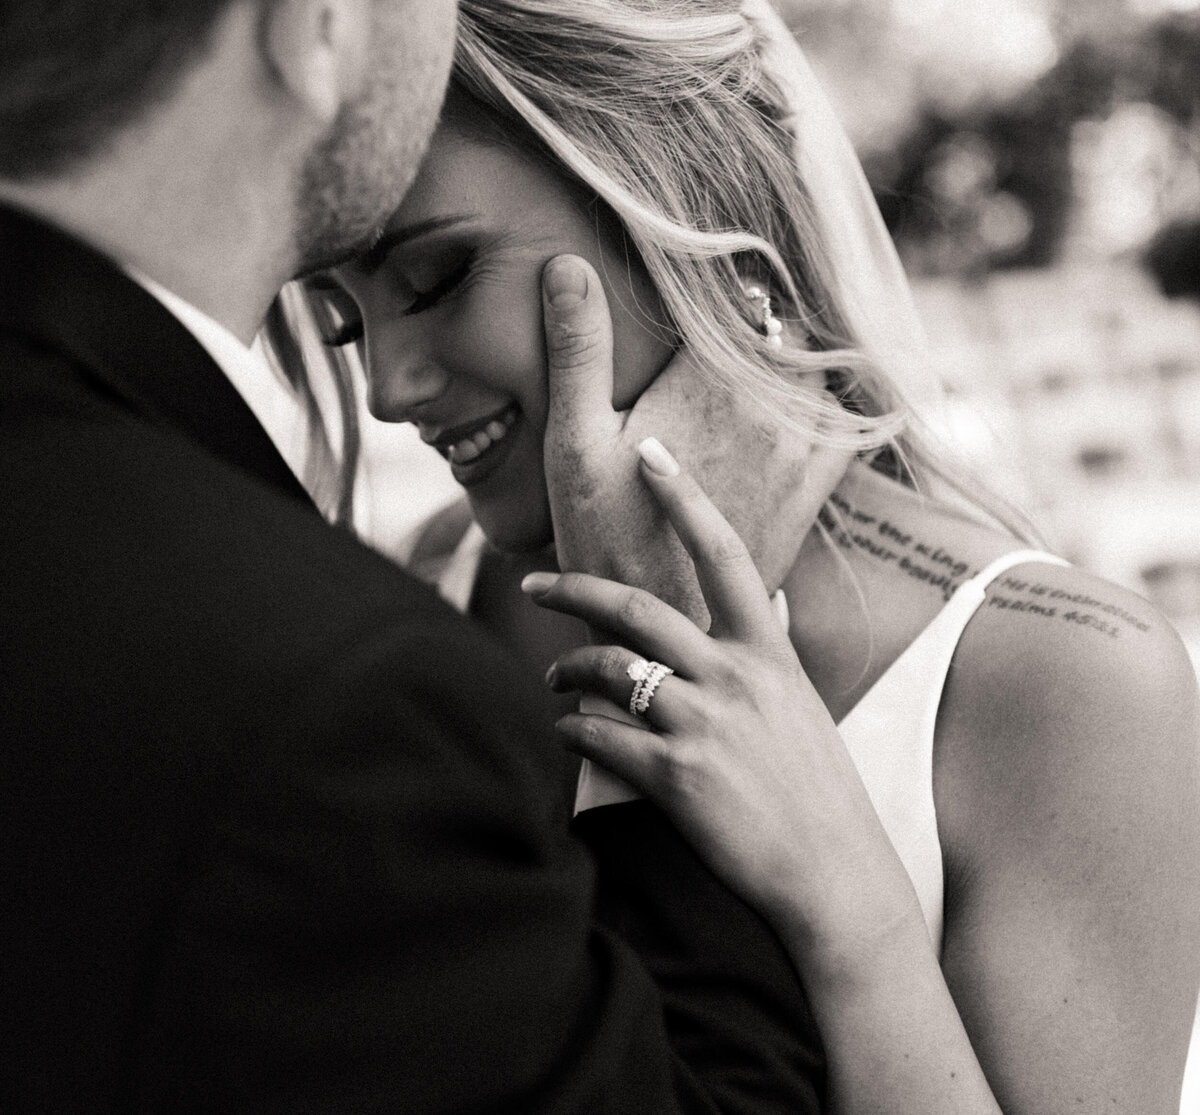 Close up of groom kissing bride's forehead as she smiles and looks down while holding his hand